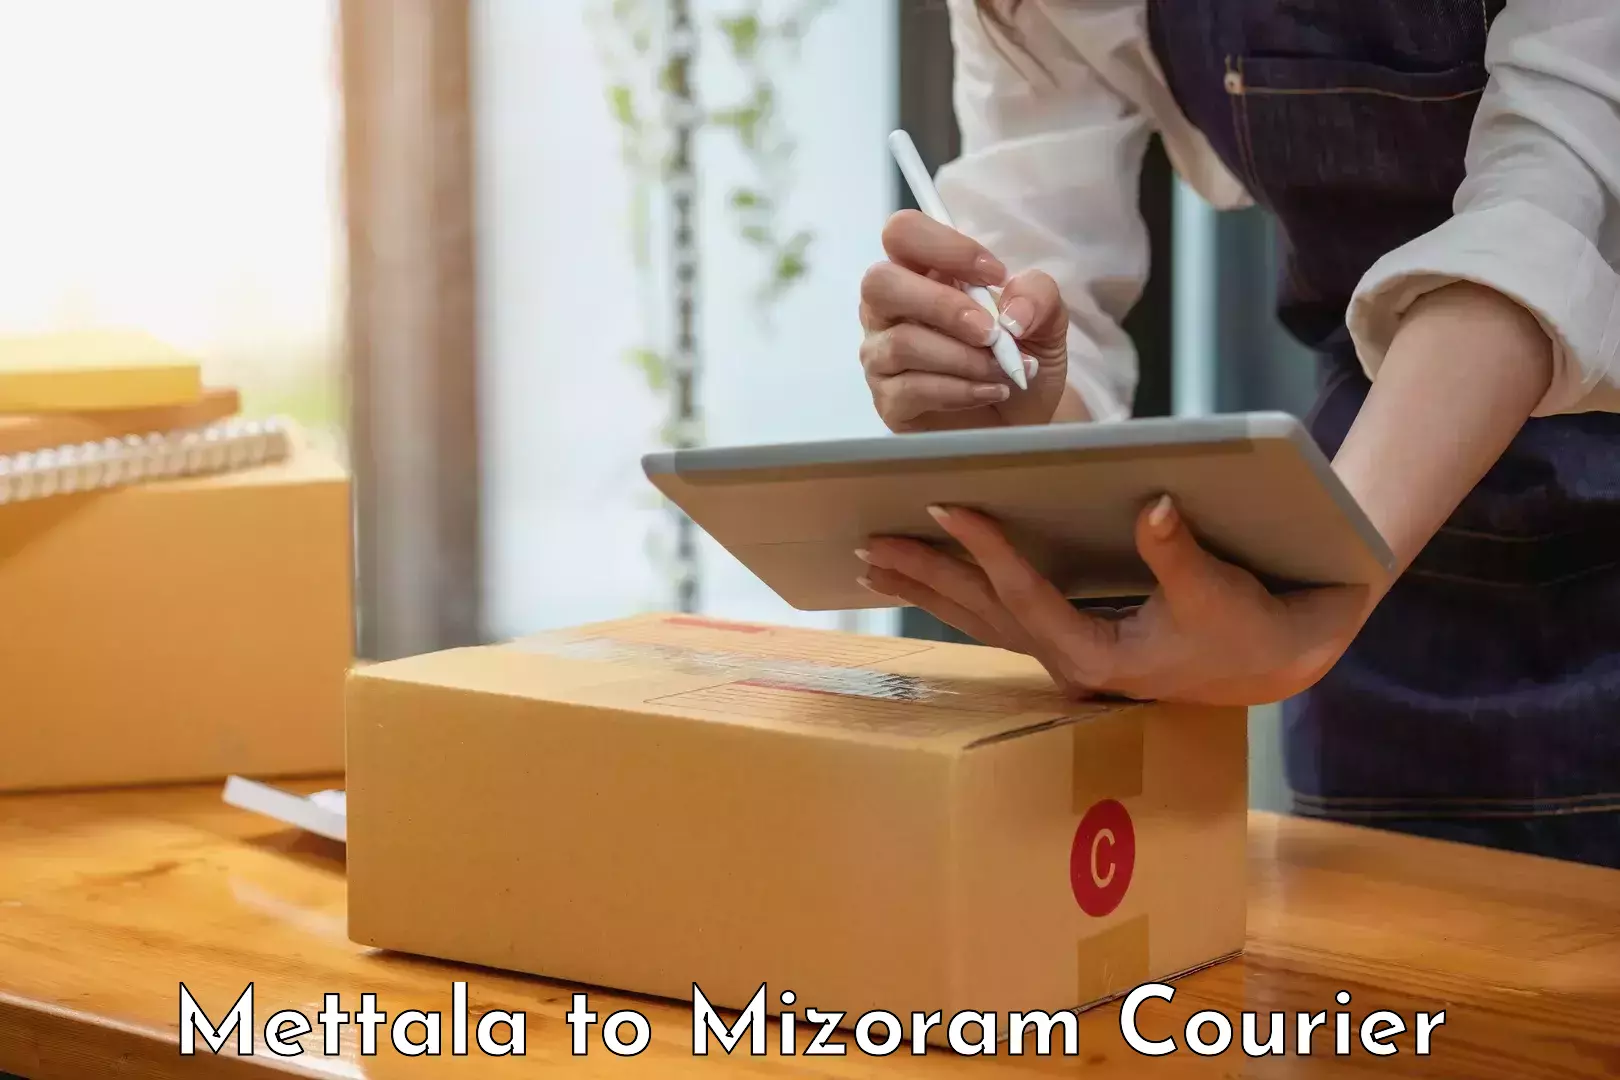 Affordable parcel service Mettala to Darlawn